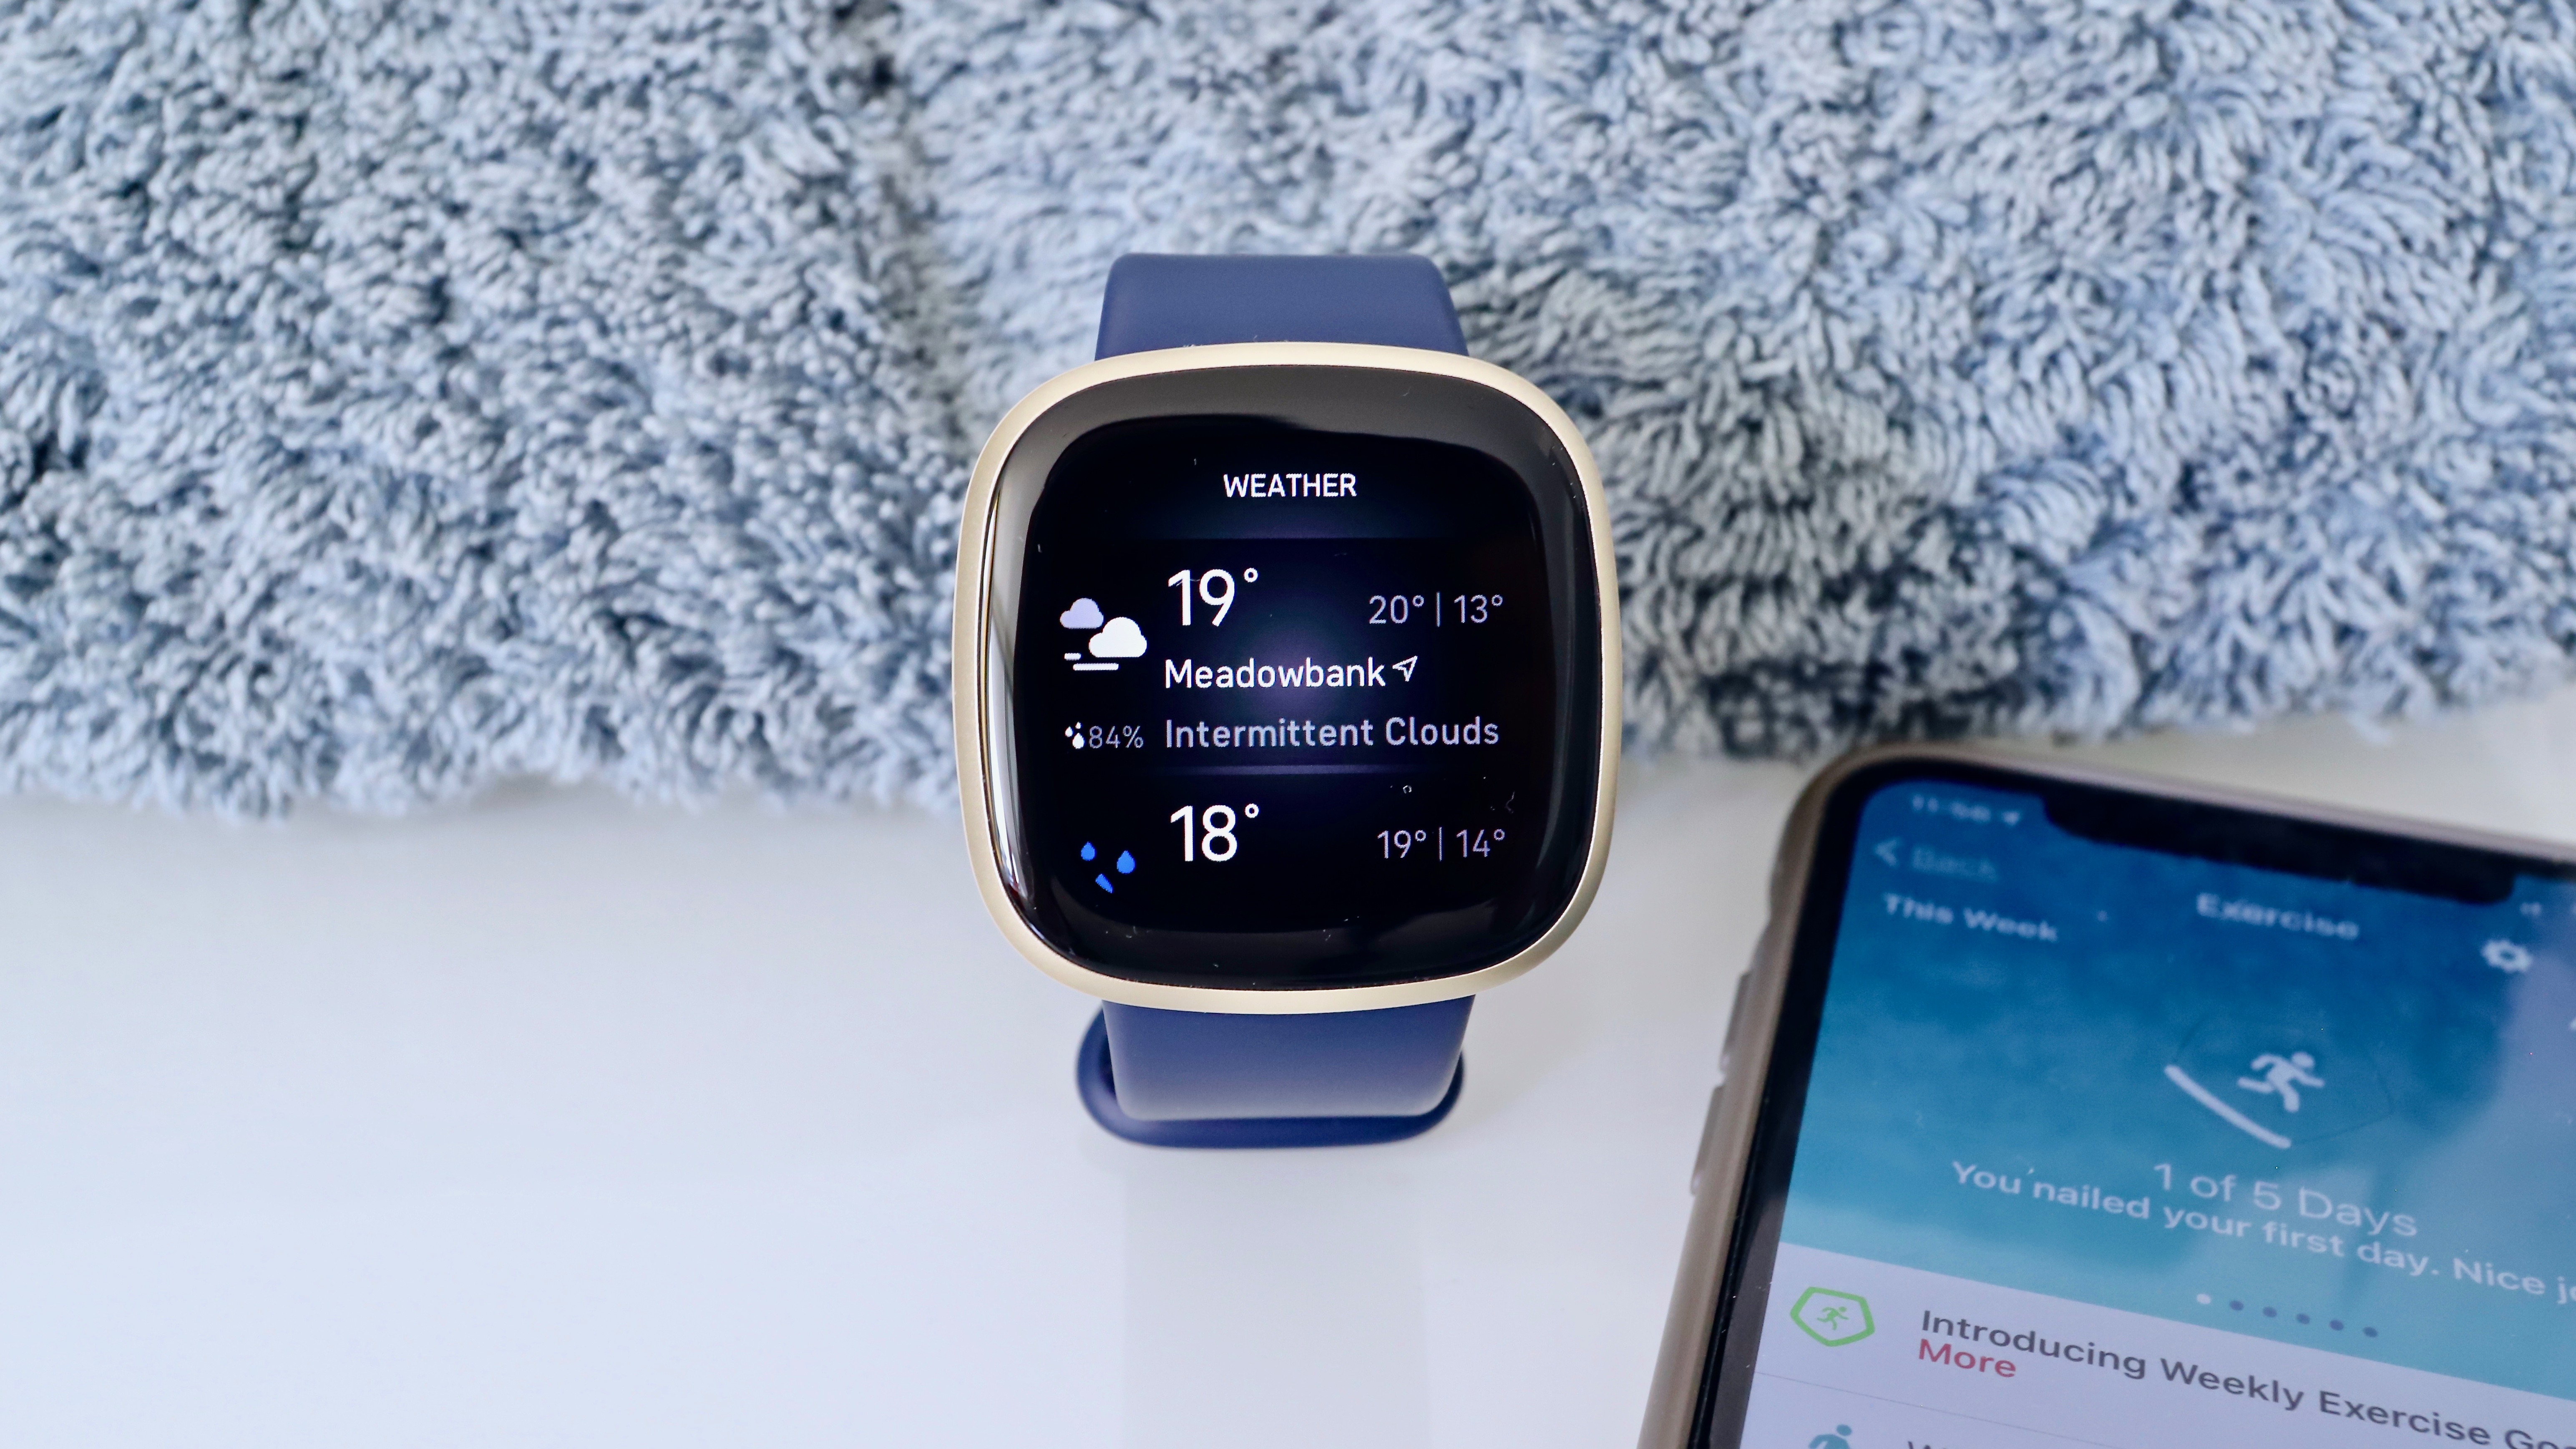 Fitbit Versa 3 with weather app on screen